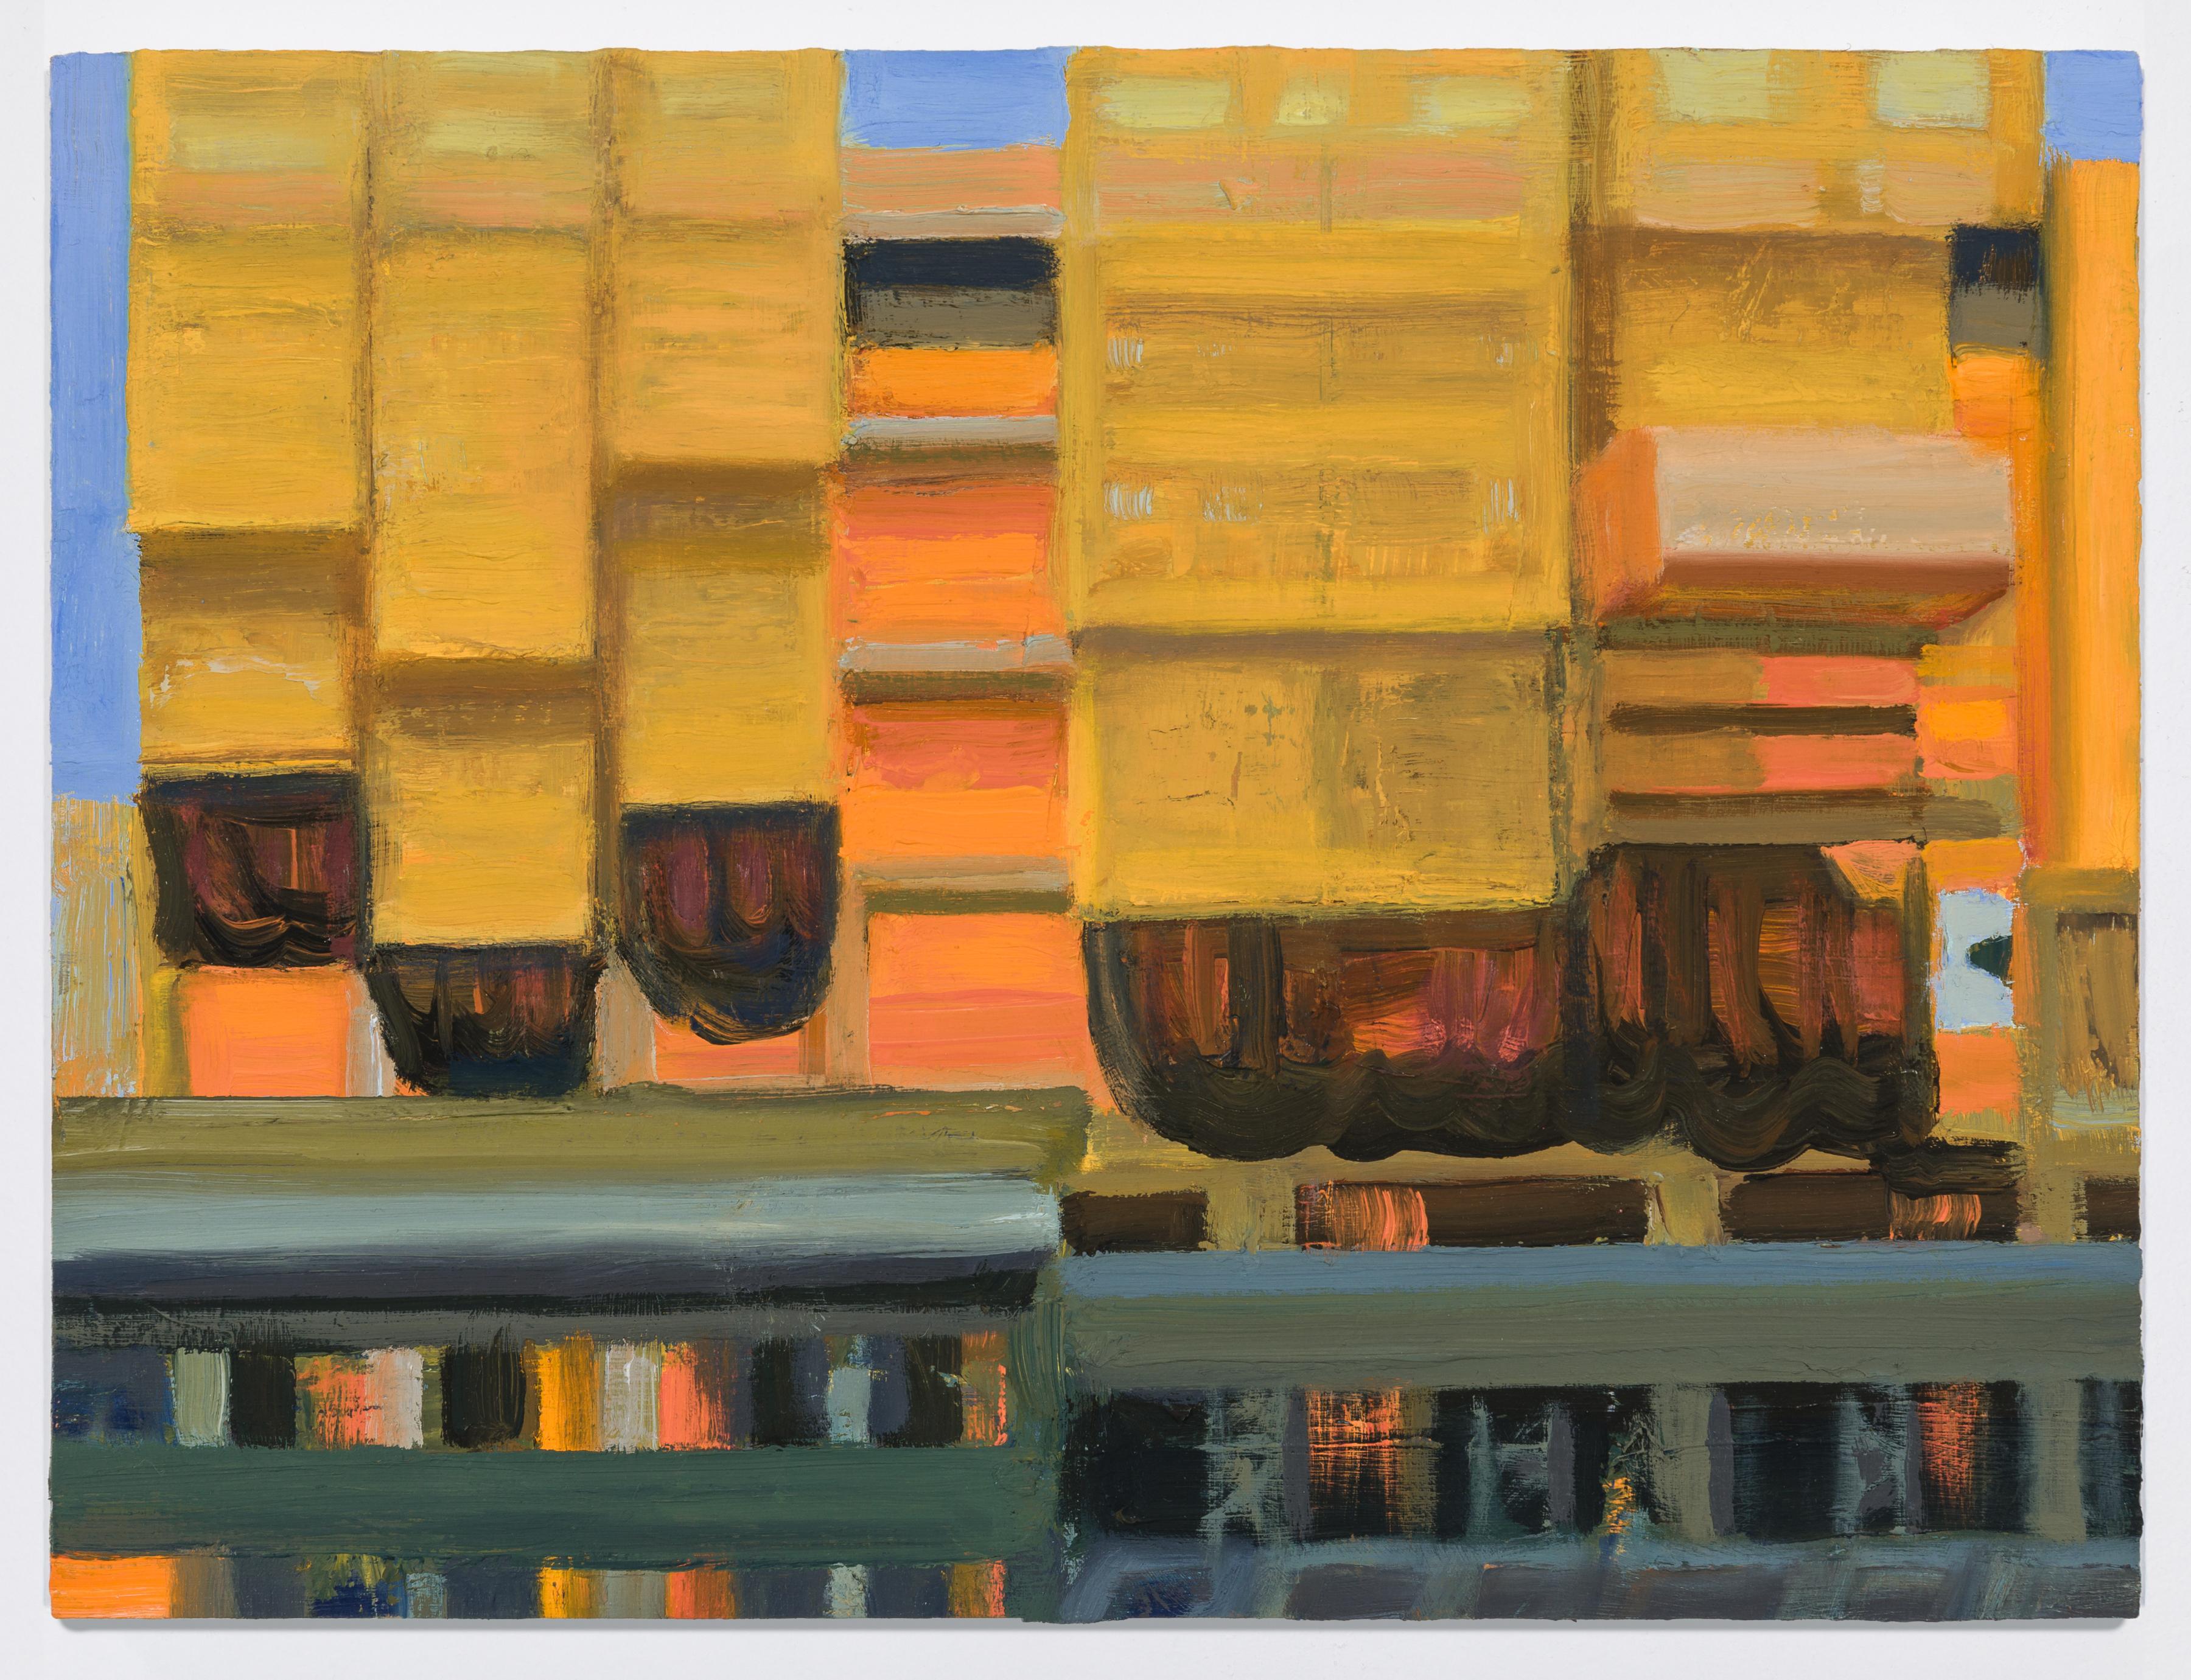 Gwyneth Leech Landscape Painting - Scaffold Covers #1, Upper West Side, Impressionist cityscape painting